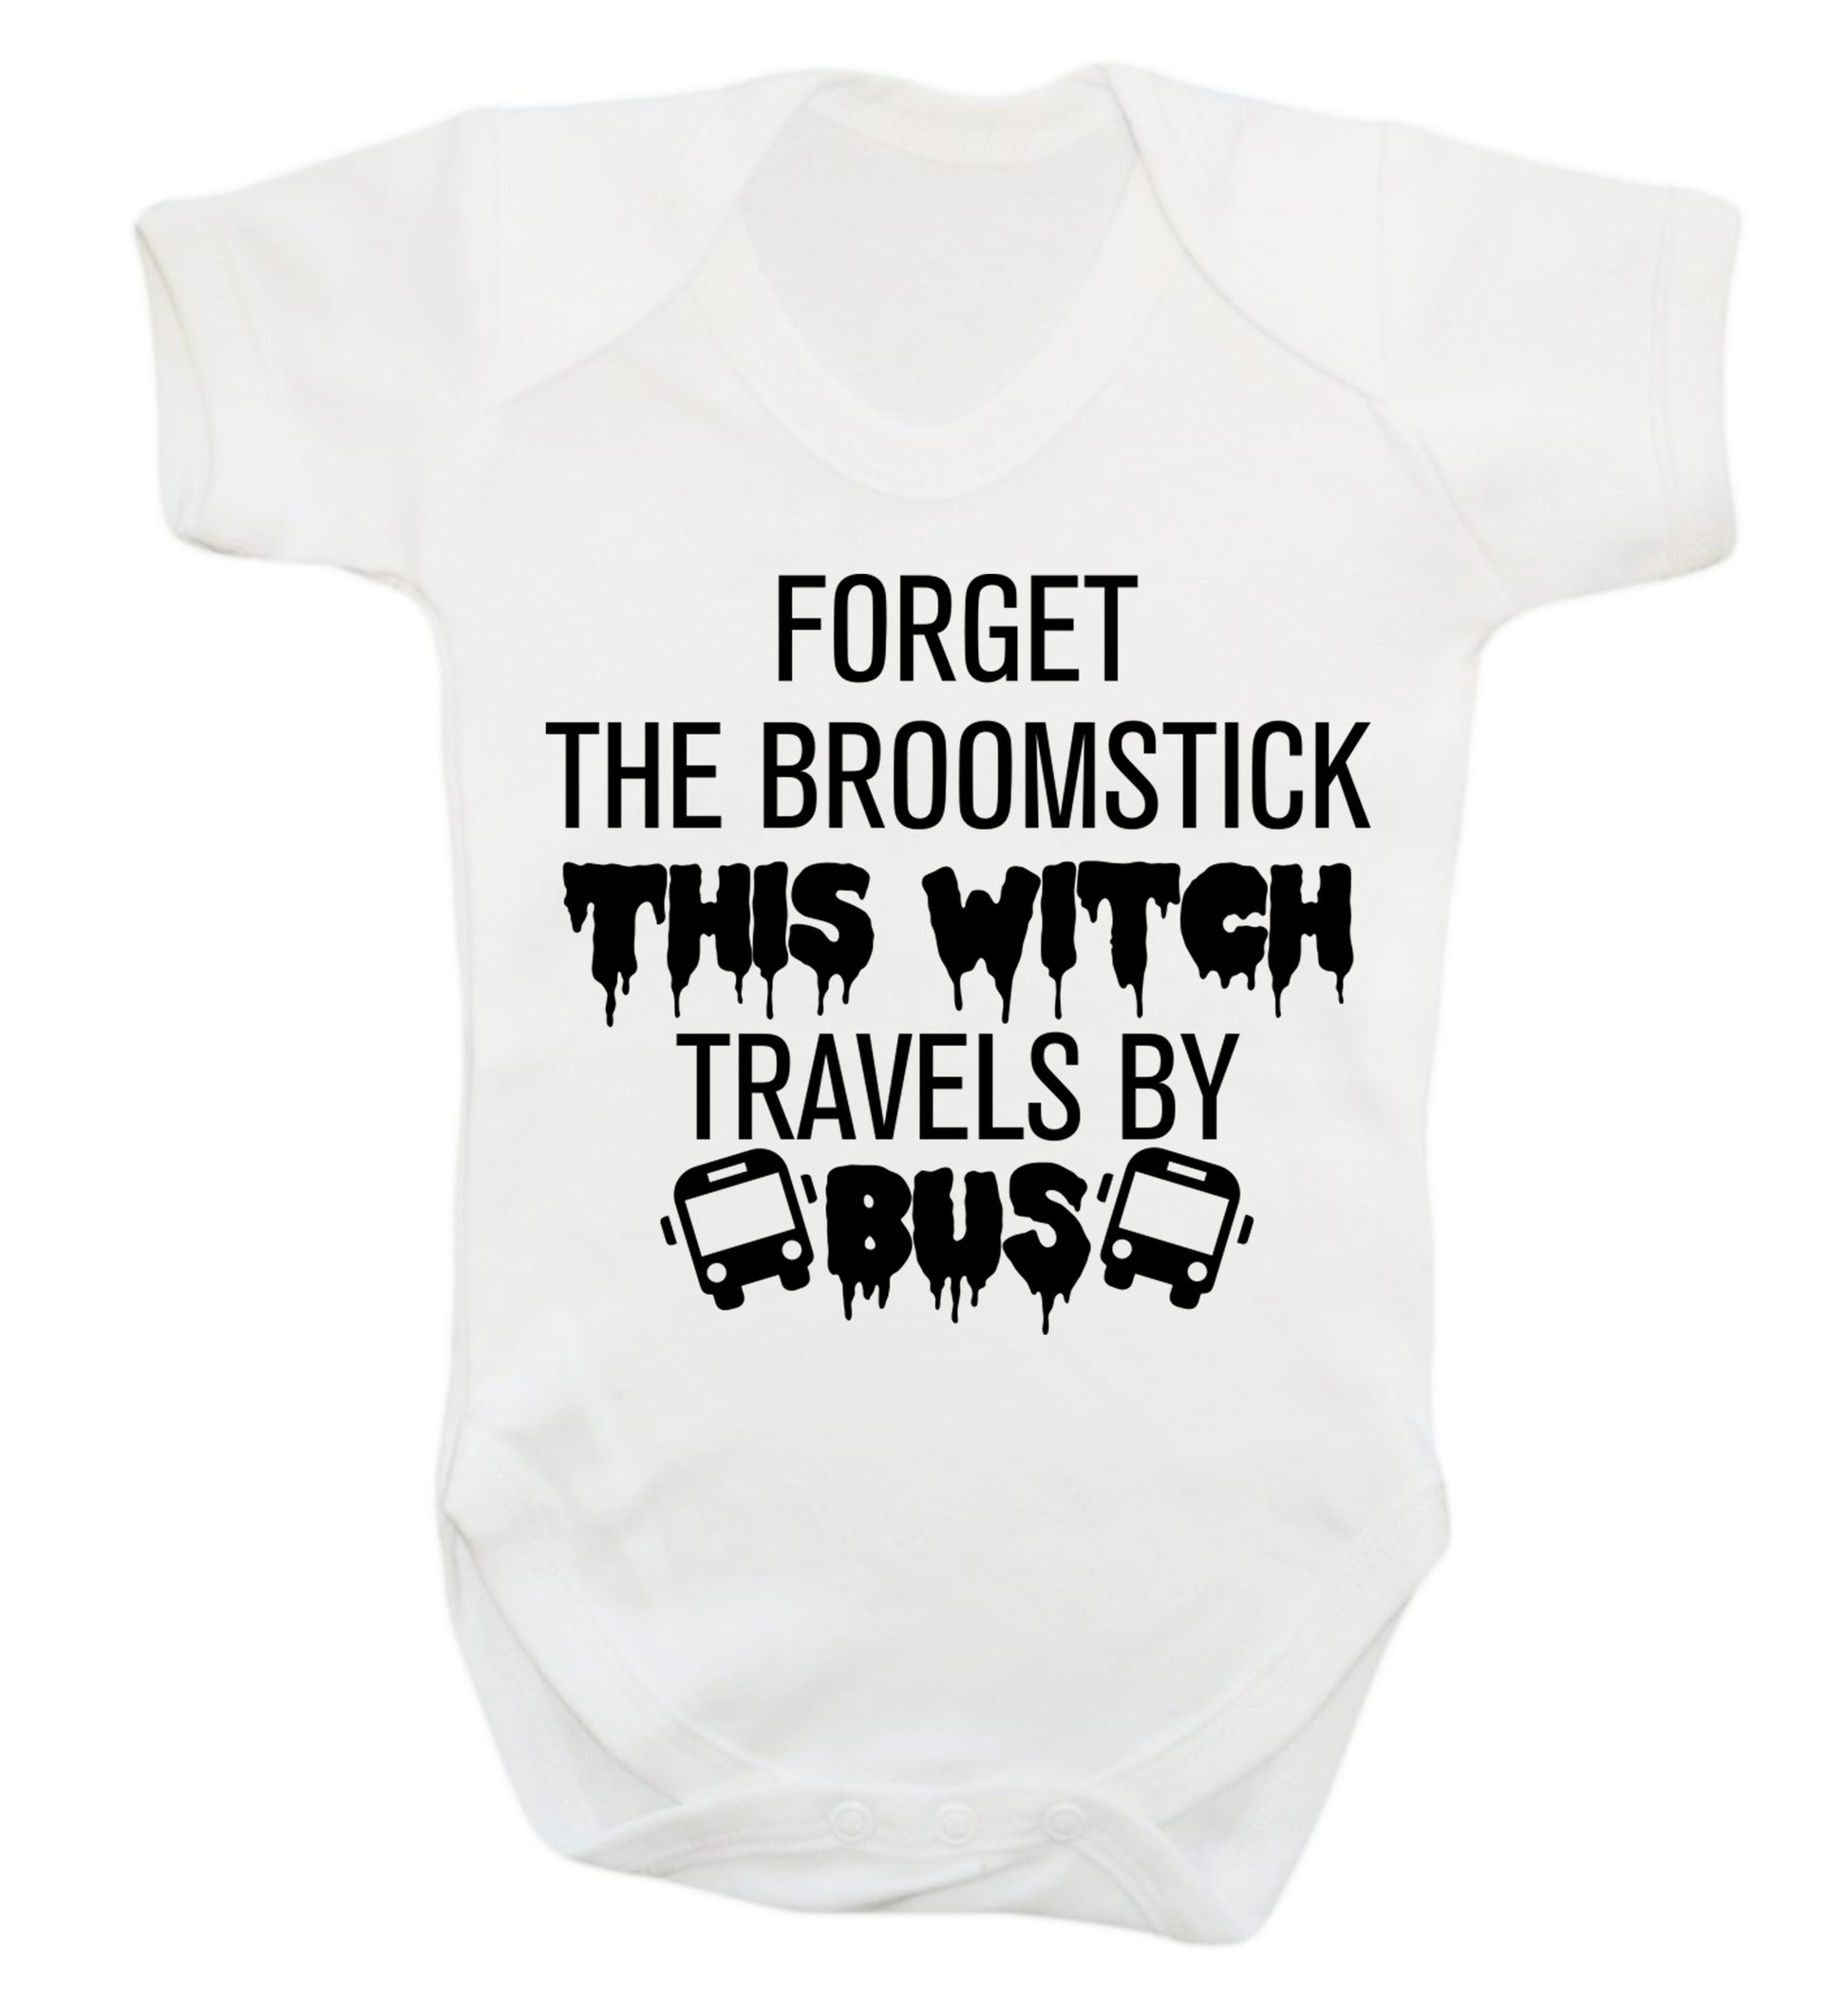 Forget the broomstick this witch travels by bus Baby Vest white 18-24 months